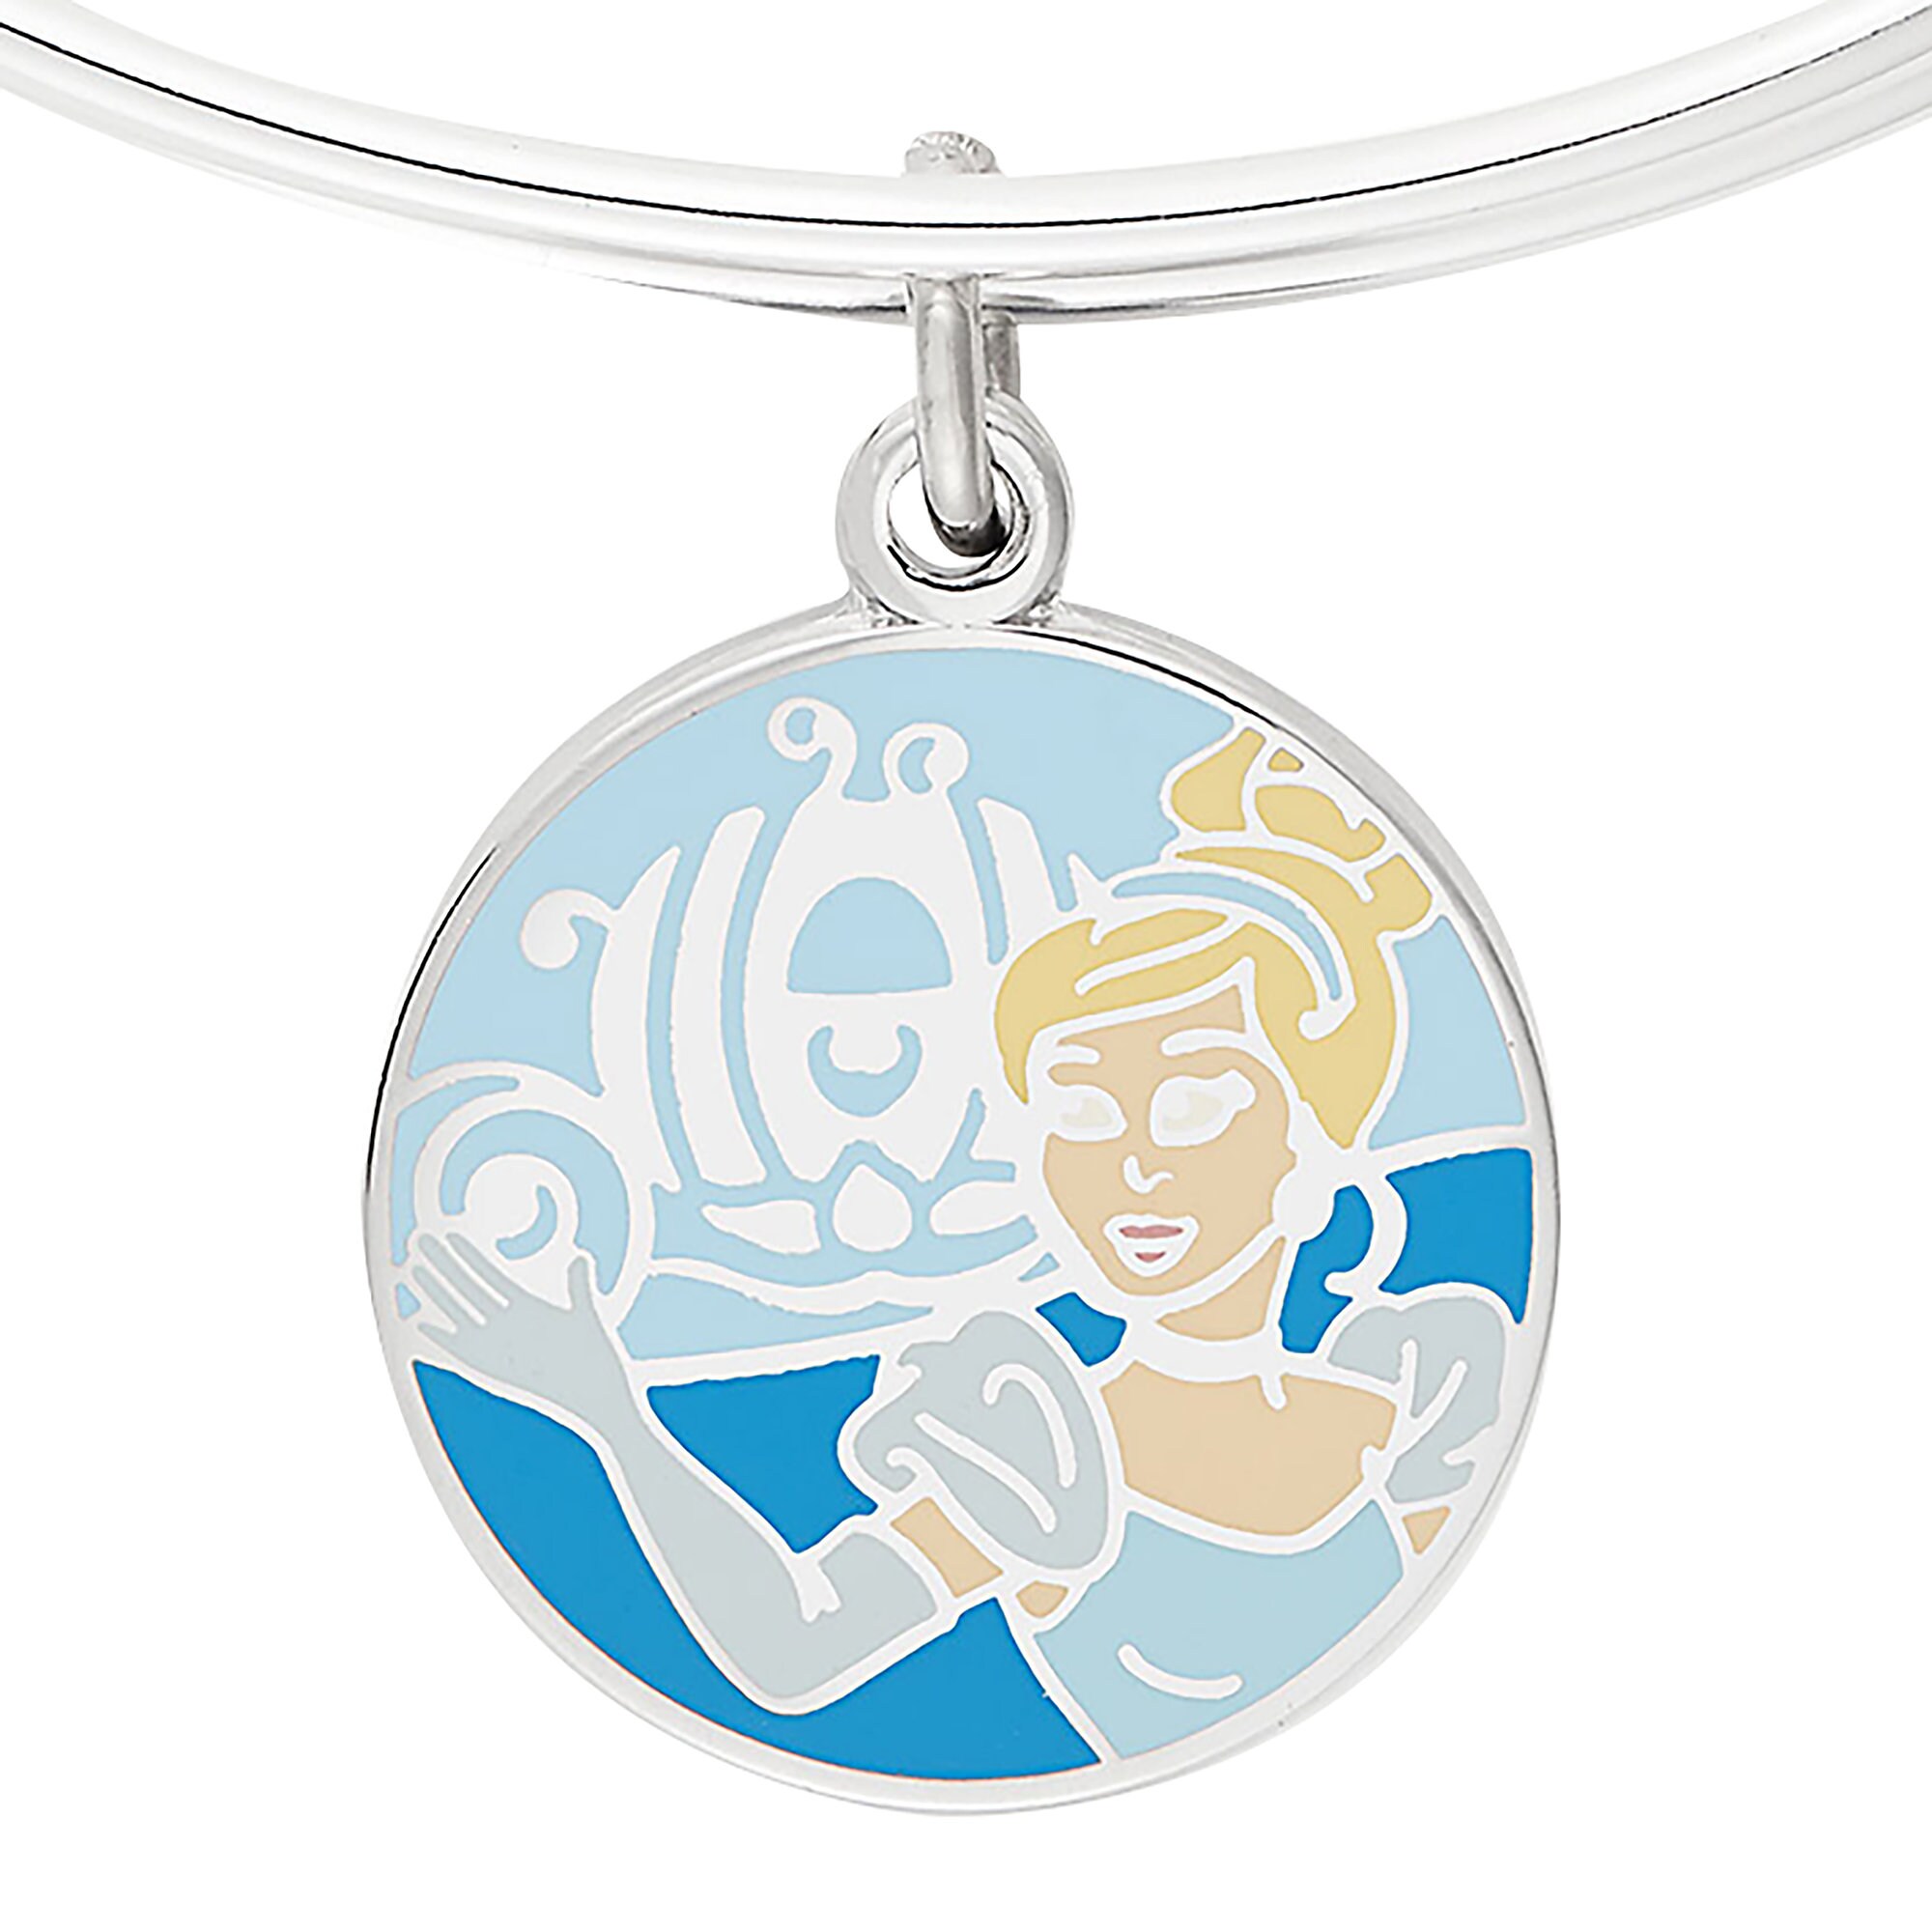 Cinderella ''Have courage and be kind'' Bangle by Alex and Ani